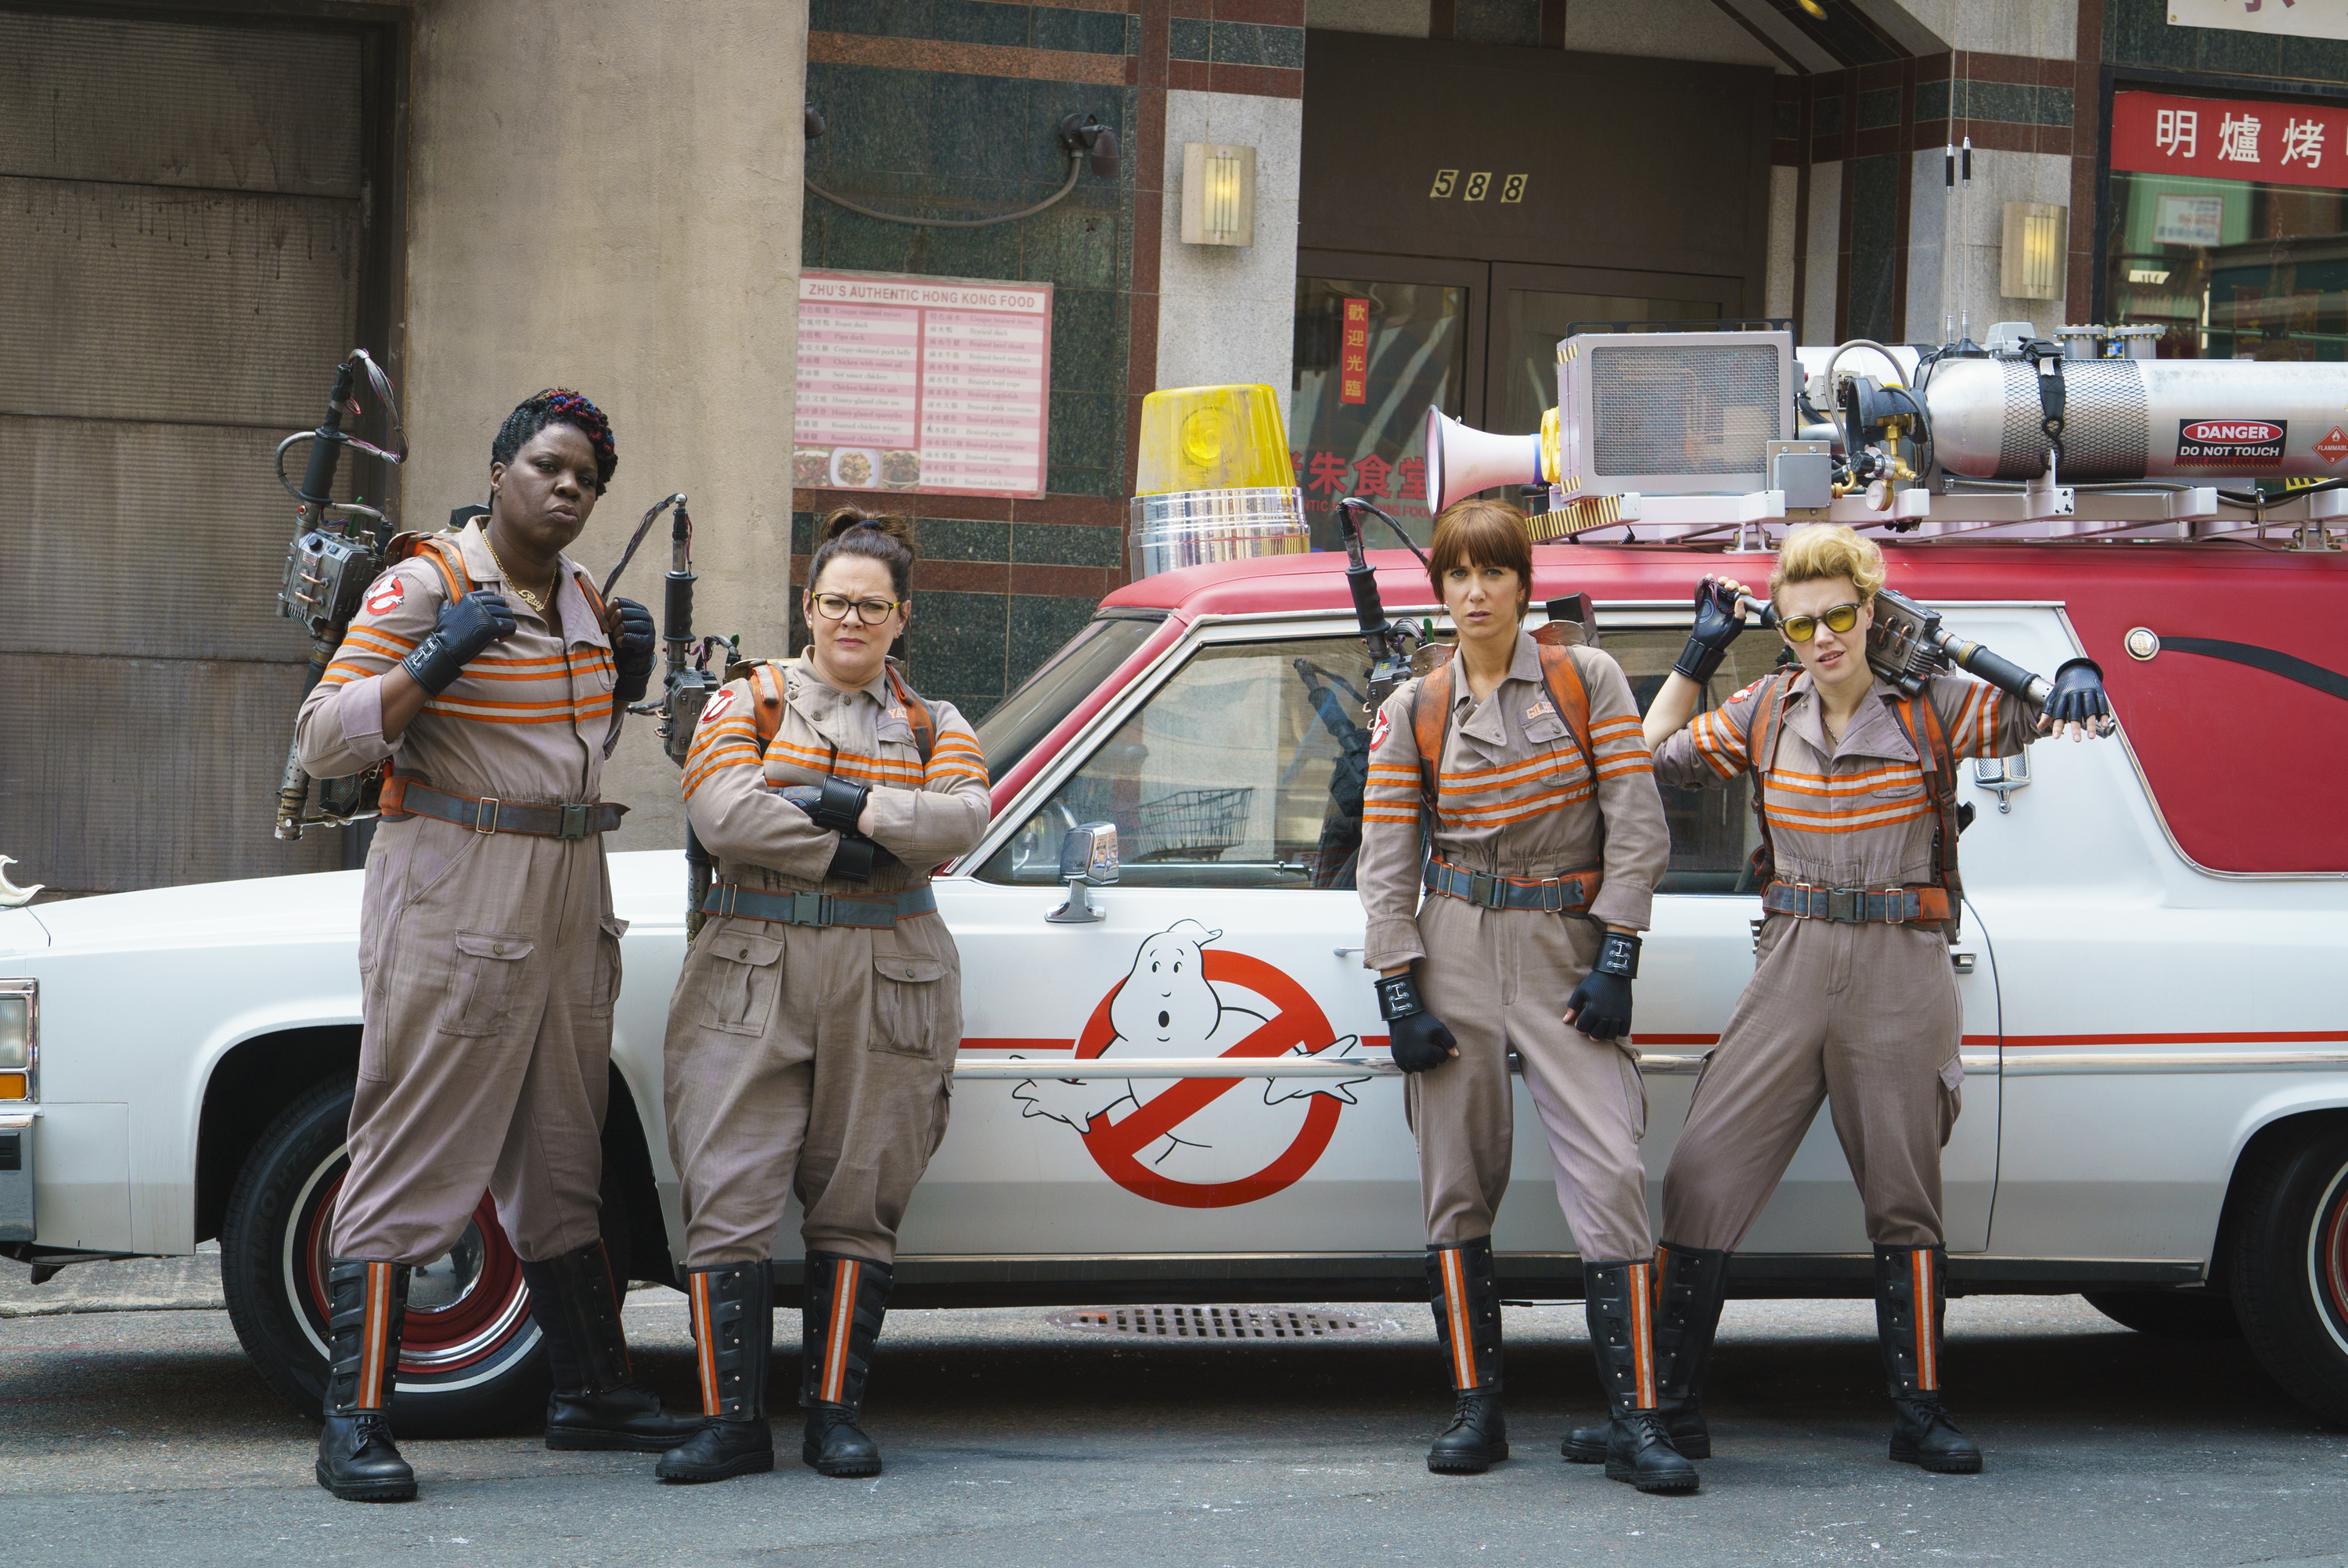 From left: Leslie Jones, Melissa McCarthy, Kristen Wiig and Kate McKinnon in <i>Ghostbusters</i>. (Hopper Stone—Sony Pictures Entertainment)